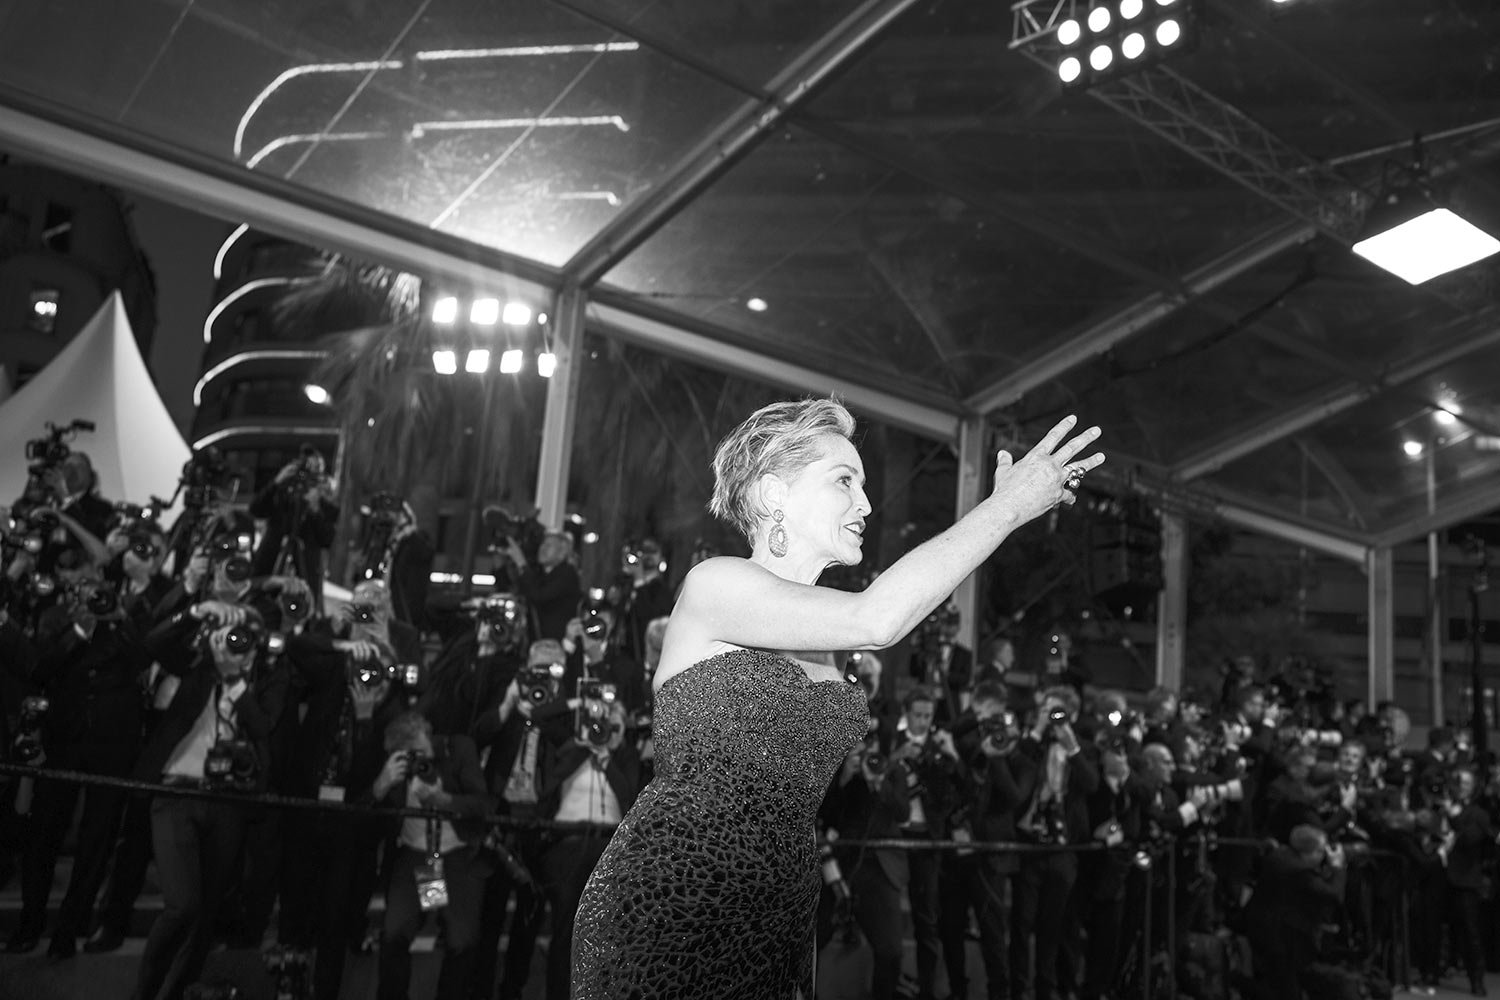  Sharon Stone poses for photographers upon arrival at the premiere of the film 'Crimes of the Future' at the 75th international film festival, Cannes, southern France, Monday, May 23, 2022. (AP Photo/Petros Giannakouris) 